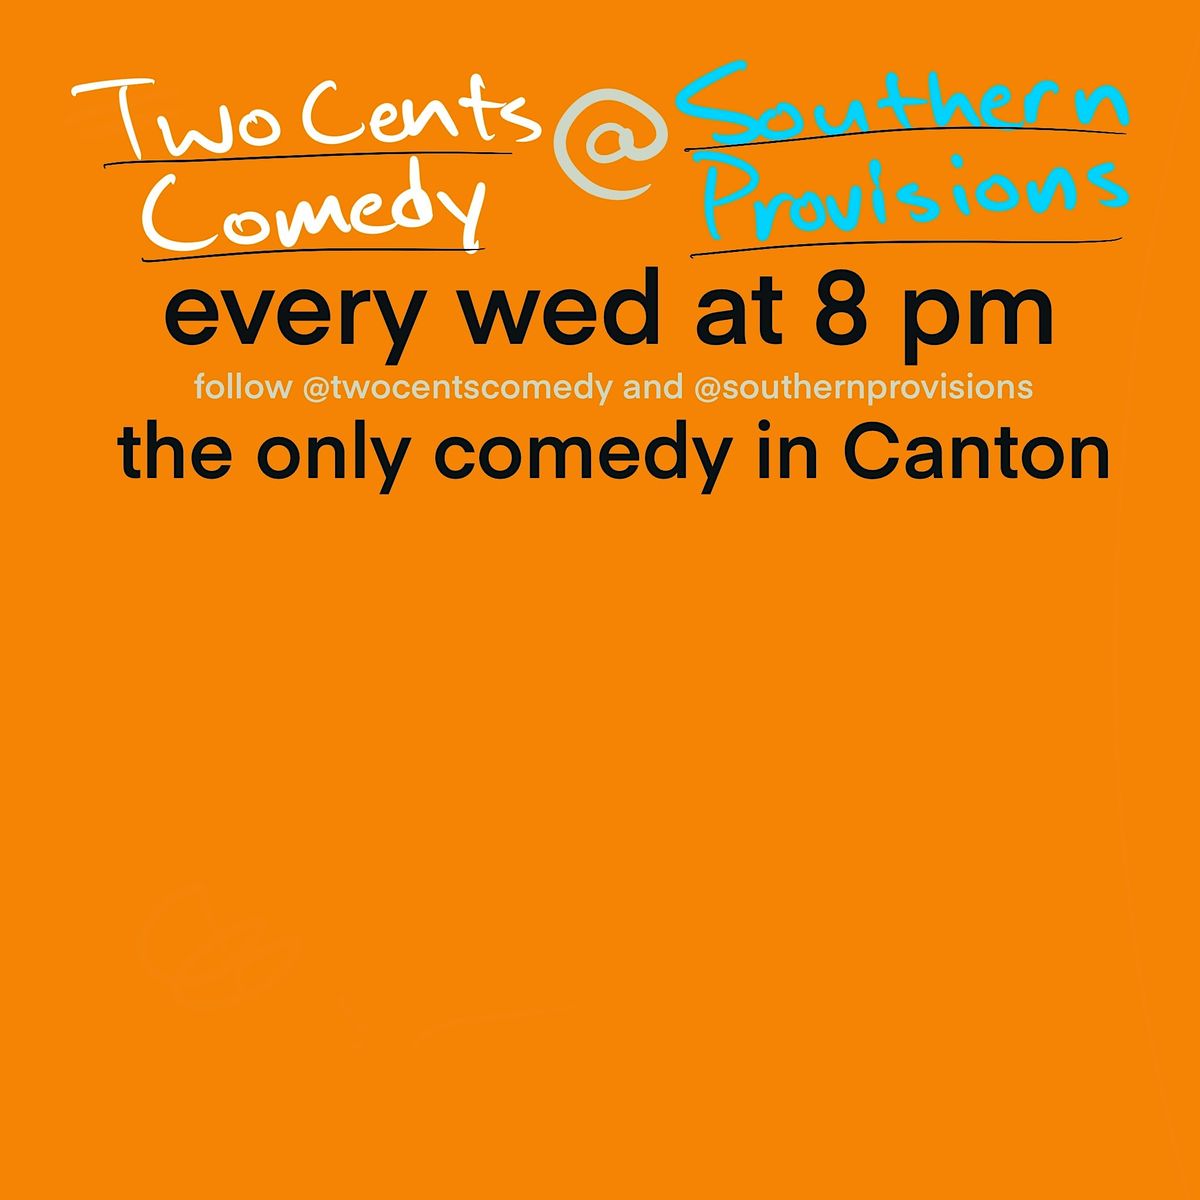 Two Cents Comedy @ Southern Provisions (Canton) Wednesdays @ 8